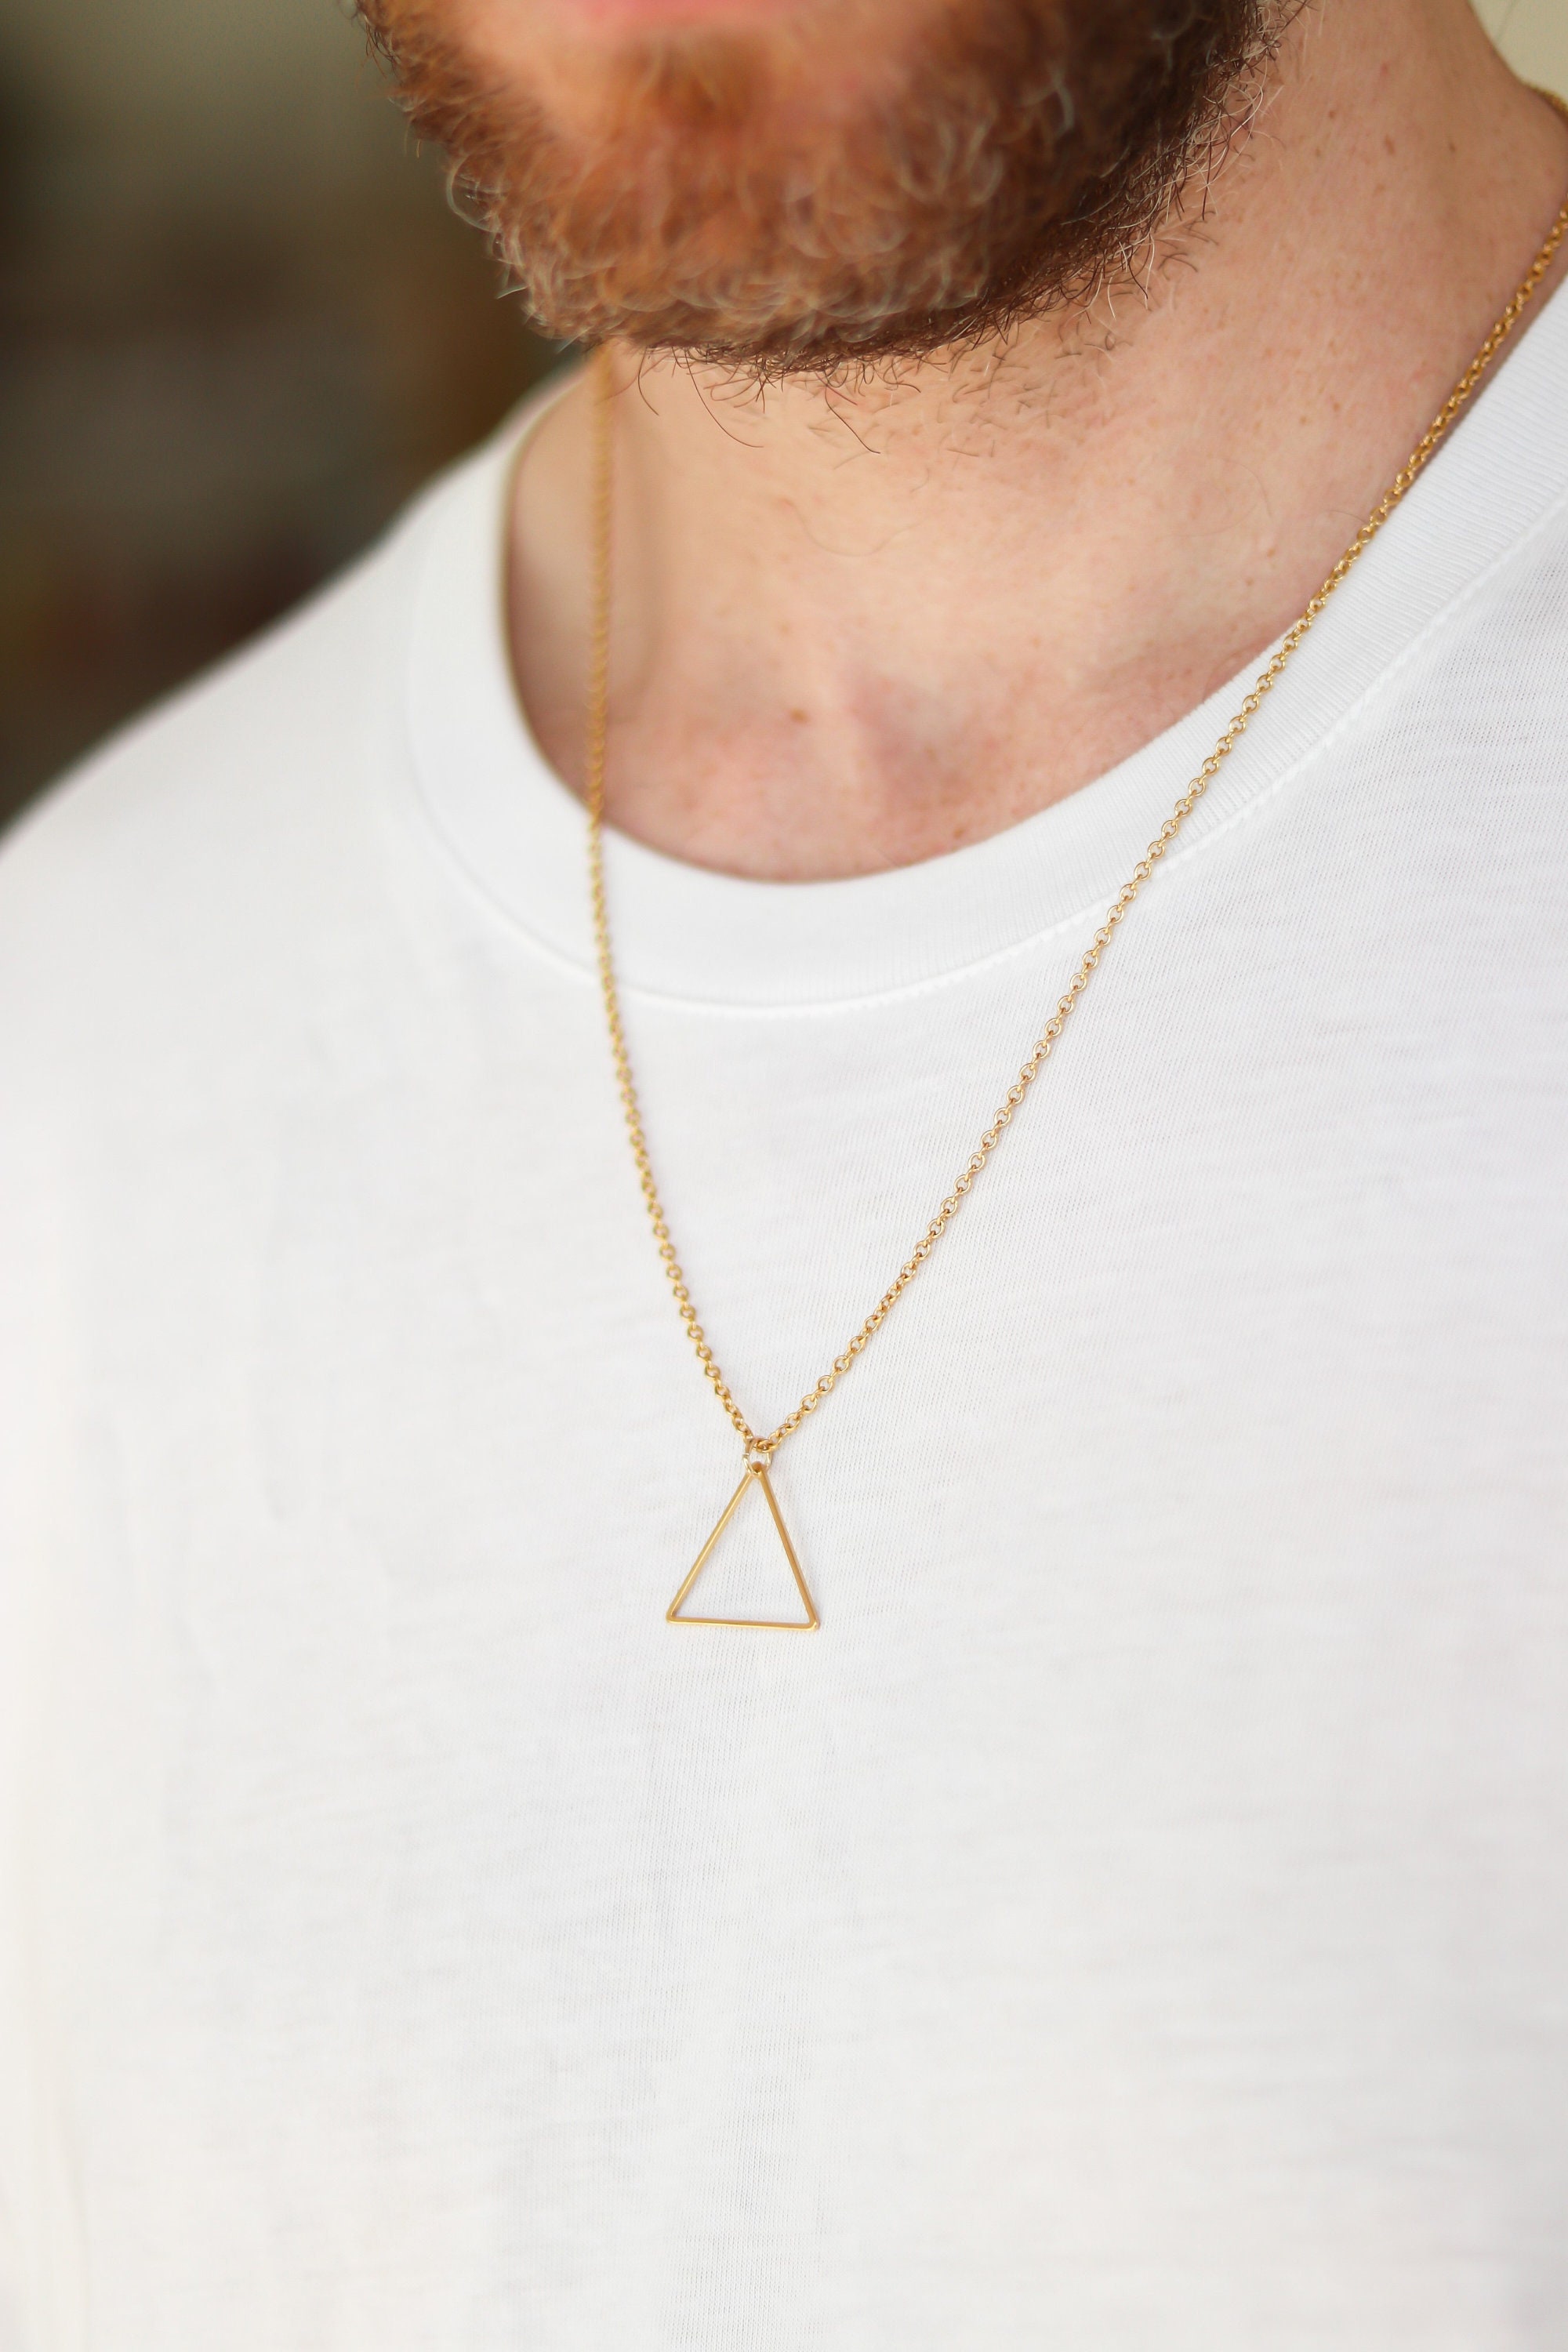 M Men Style Geometric Shape Triangle Charm Silver Stainless Steel Pendant  Necklace Chain